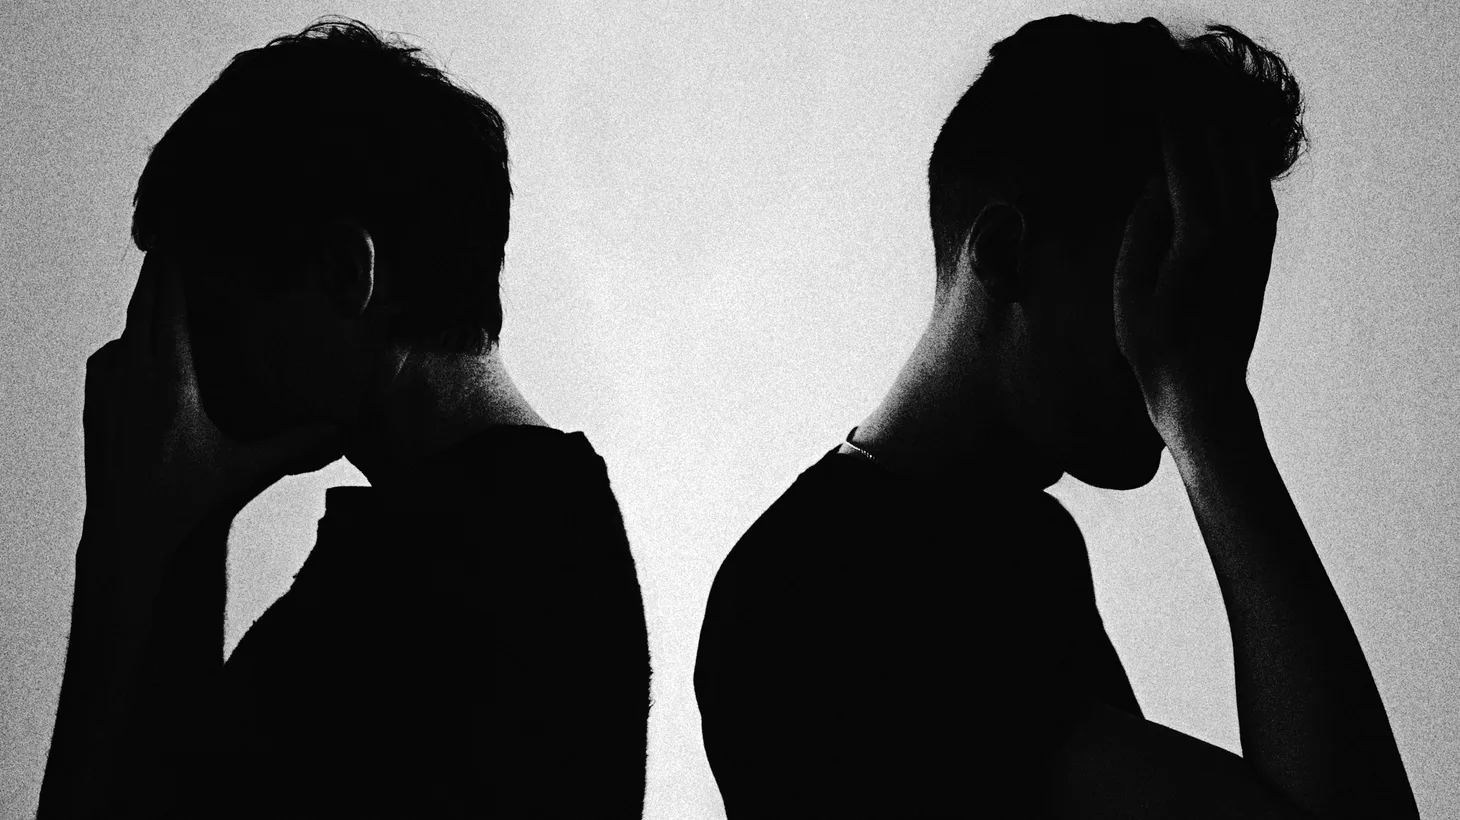 Rhye produce a seductive blend of dreamy vocals on top of soulful electronic music.